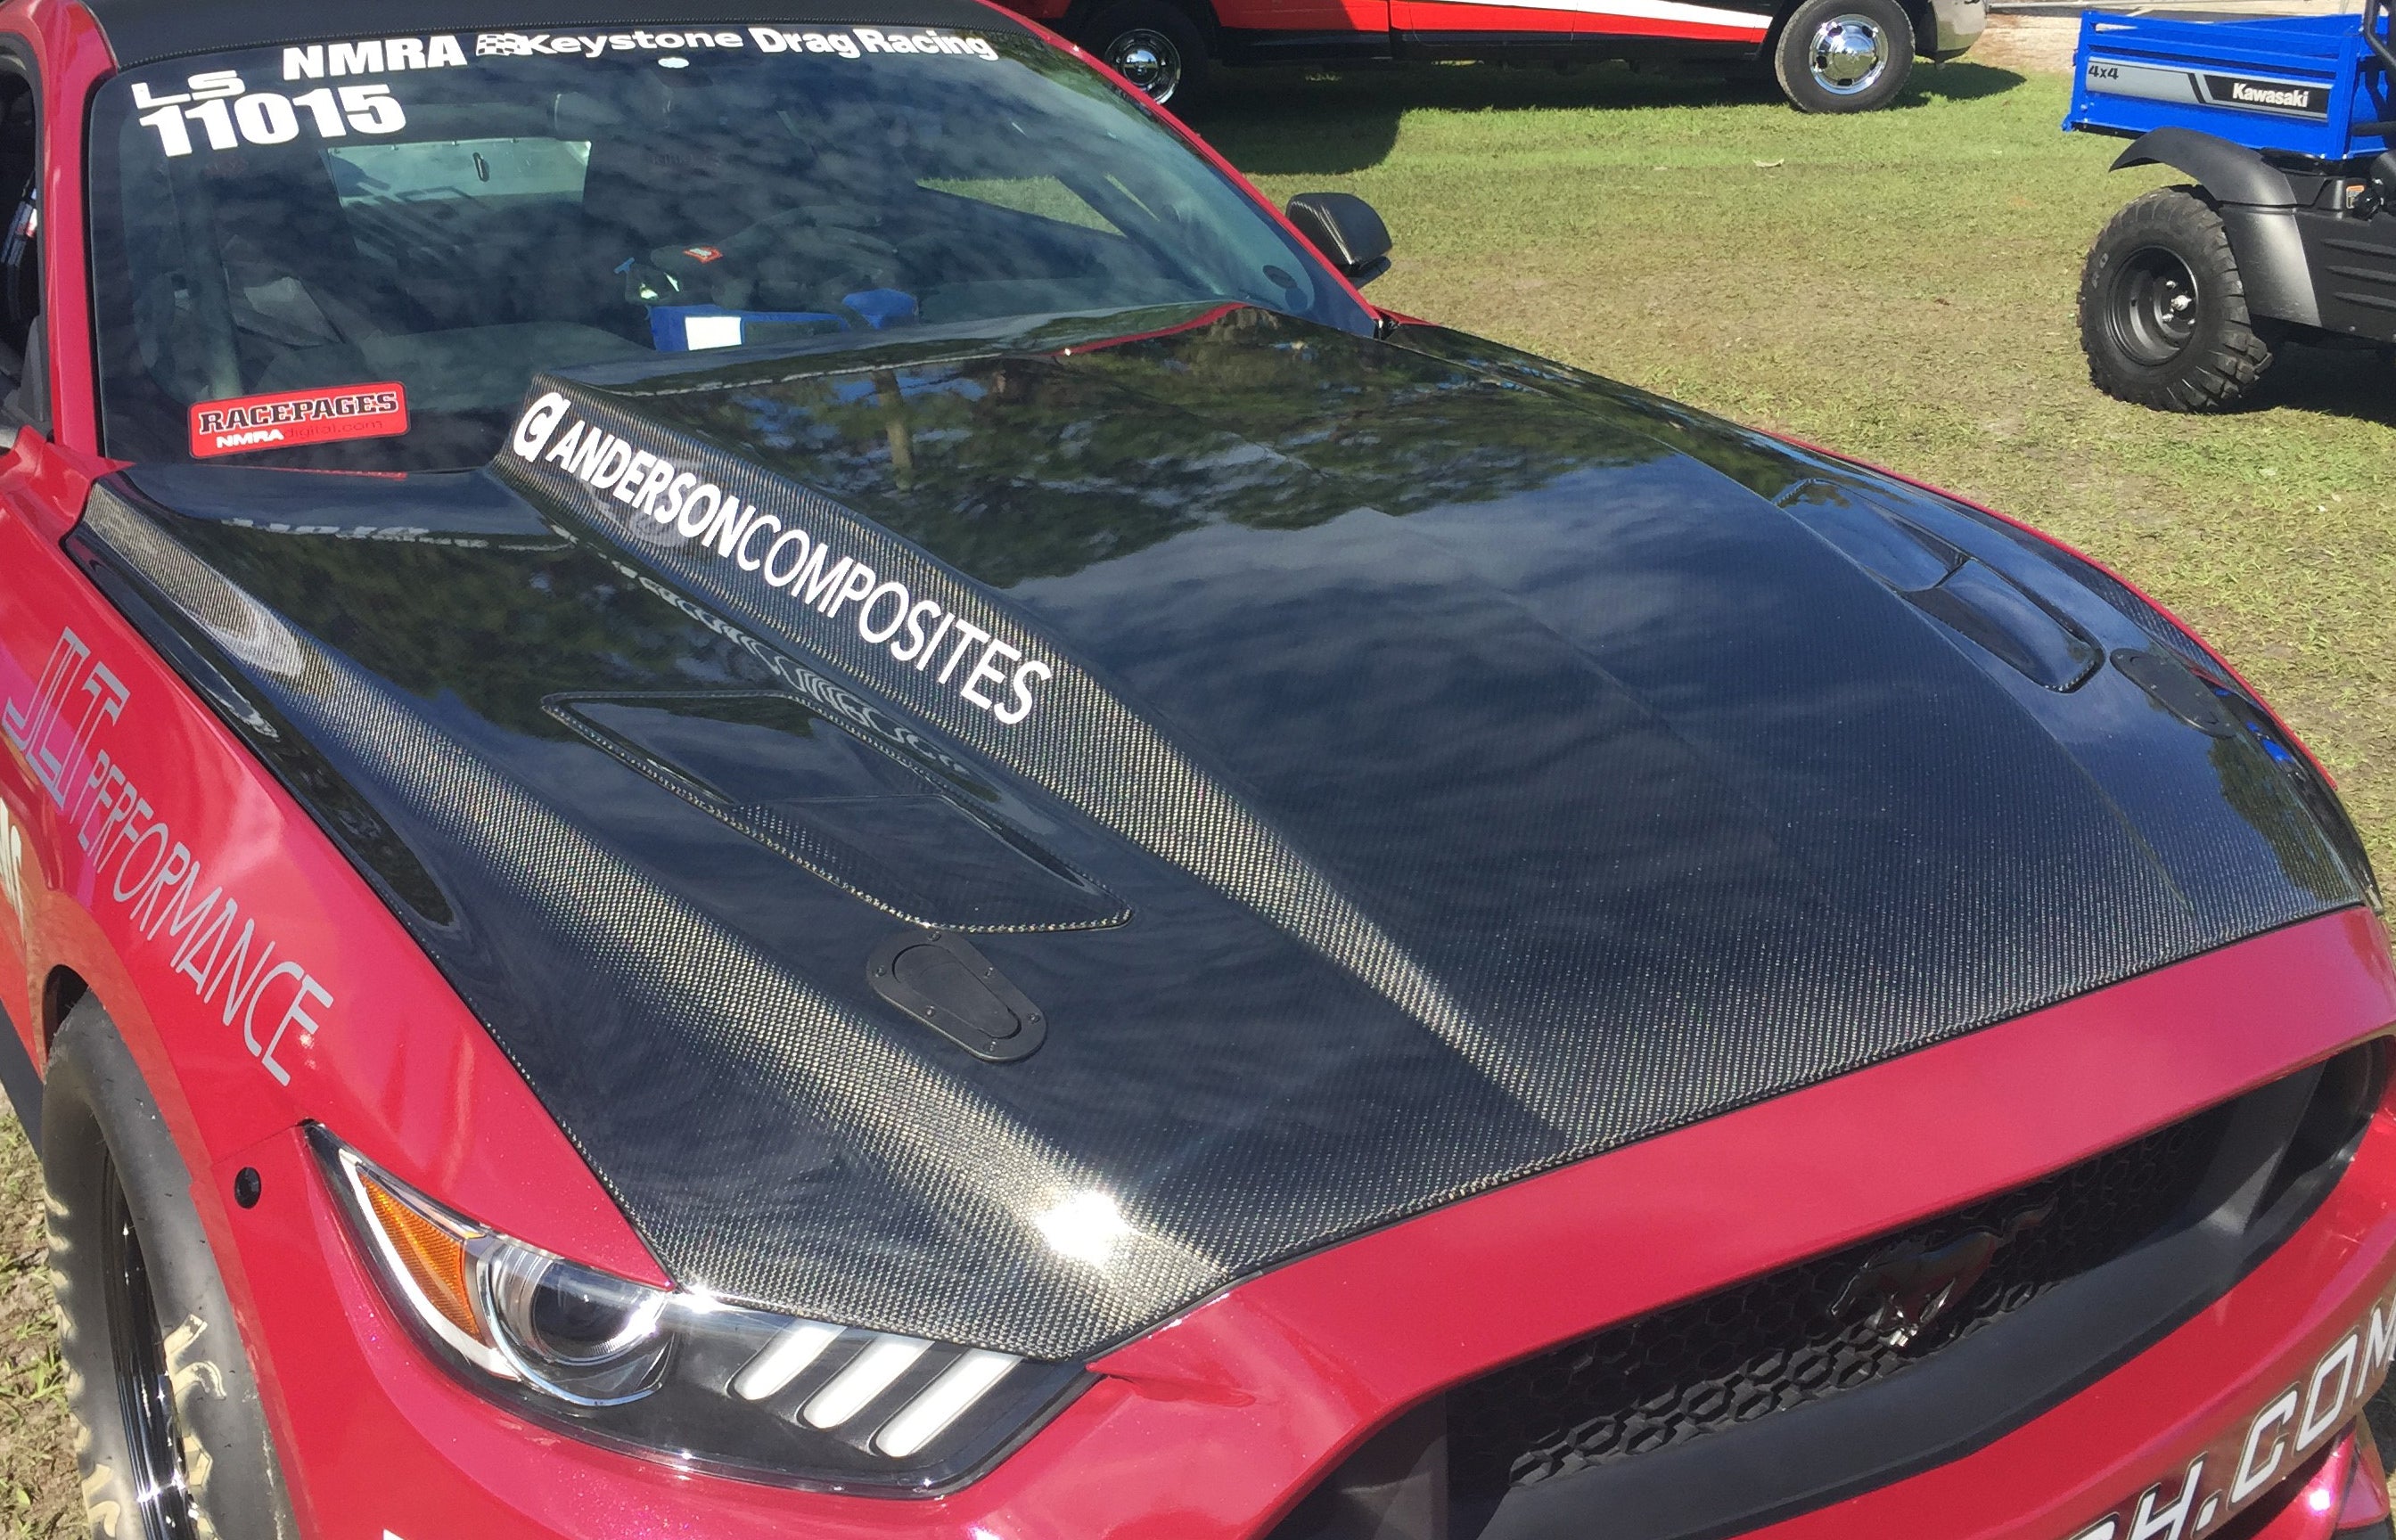 Anderson Composites tagged mustang